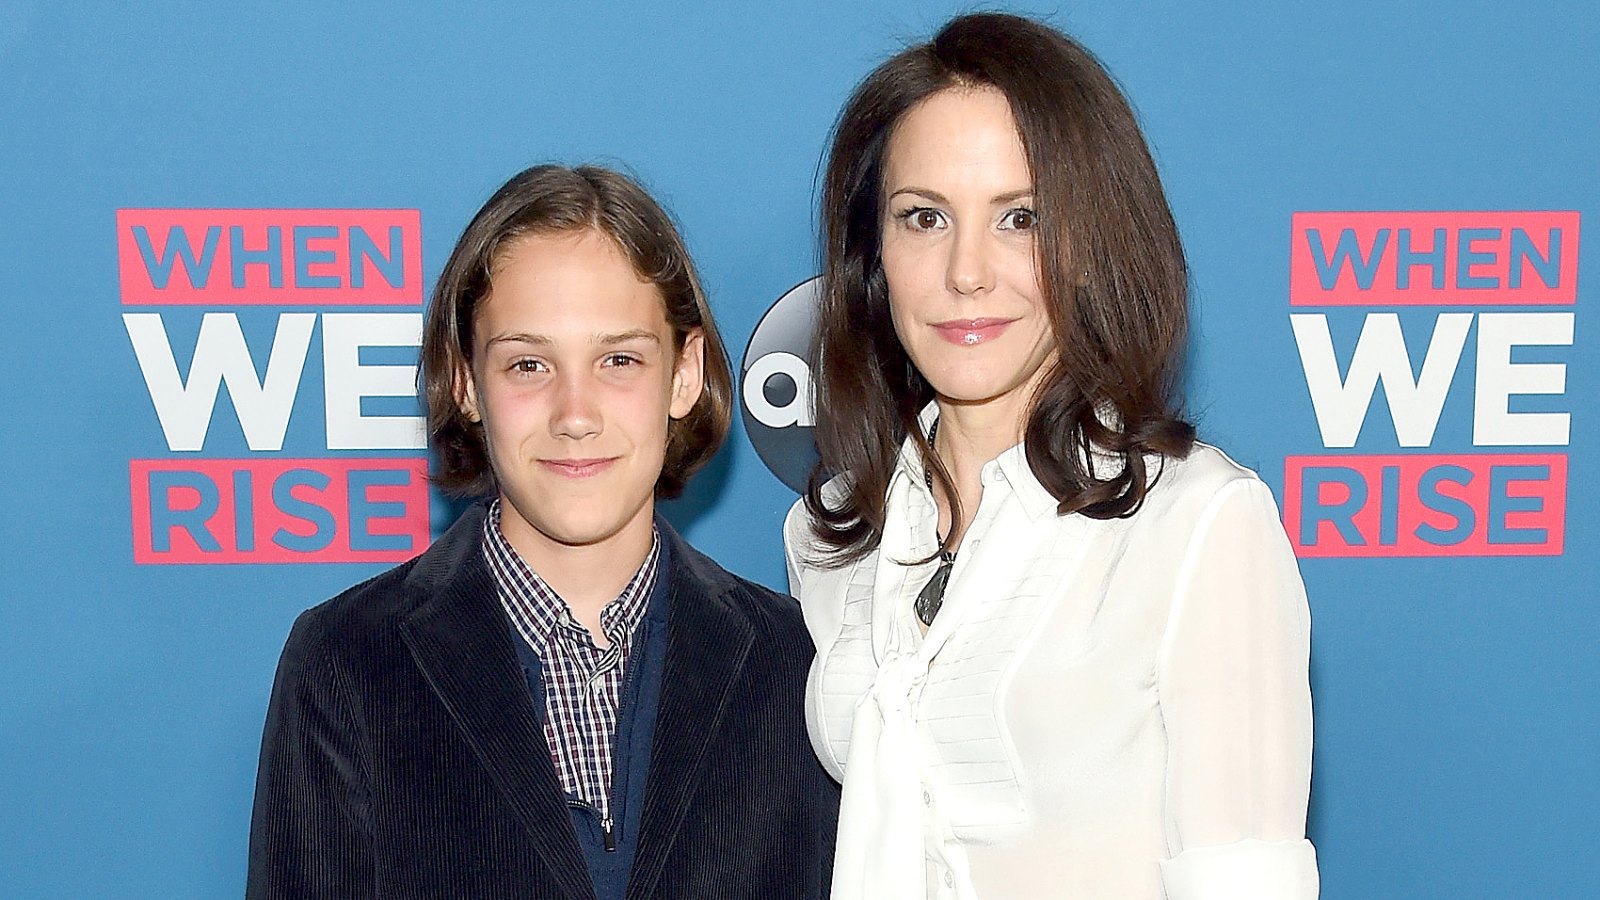 Mary-Louise Parker and her son William Parker (left) attend the "When We Rise" New York Screening Event at The Metrograph on February 22, 2017 in New York City.